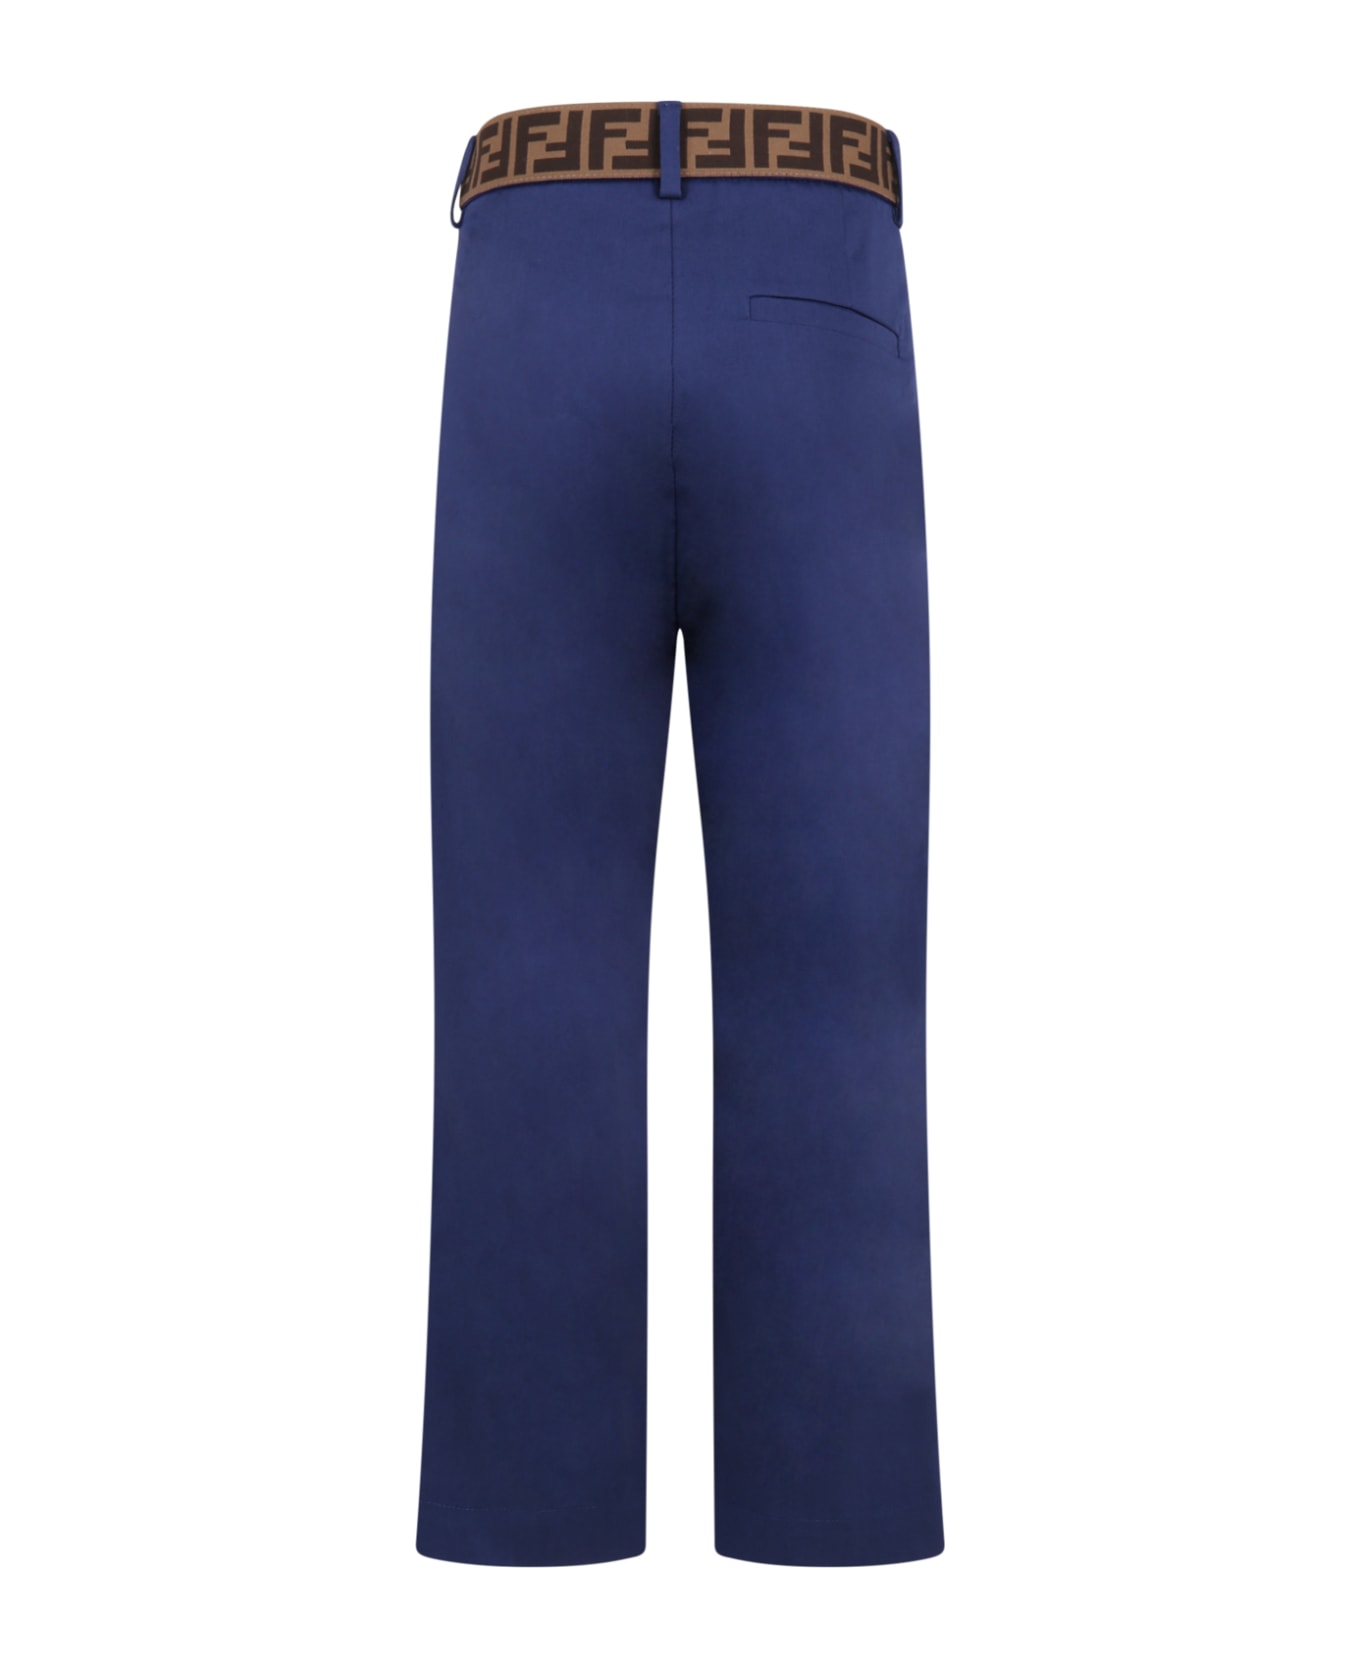 Fendi Blue Trousers Wrap For Boy With Iconic Ff - Blue